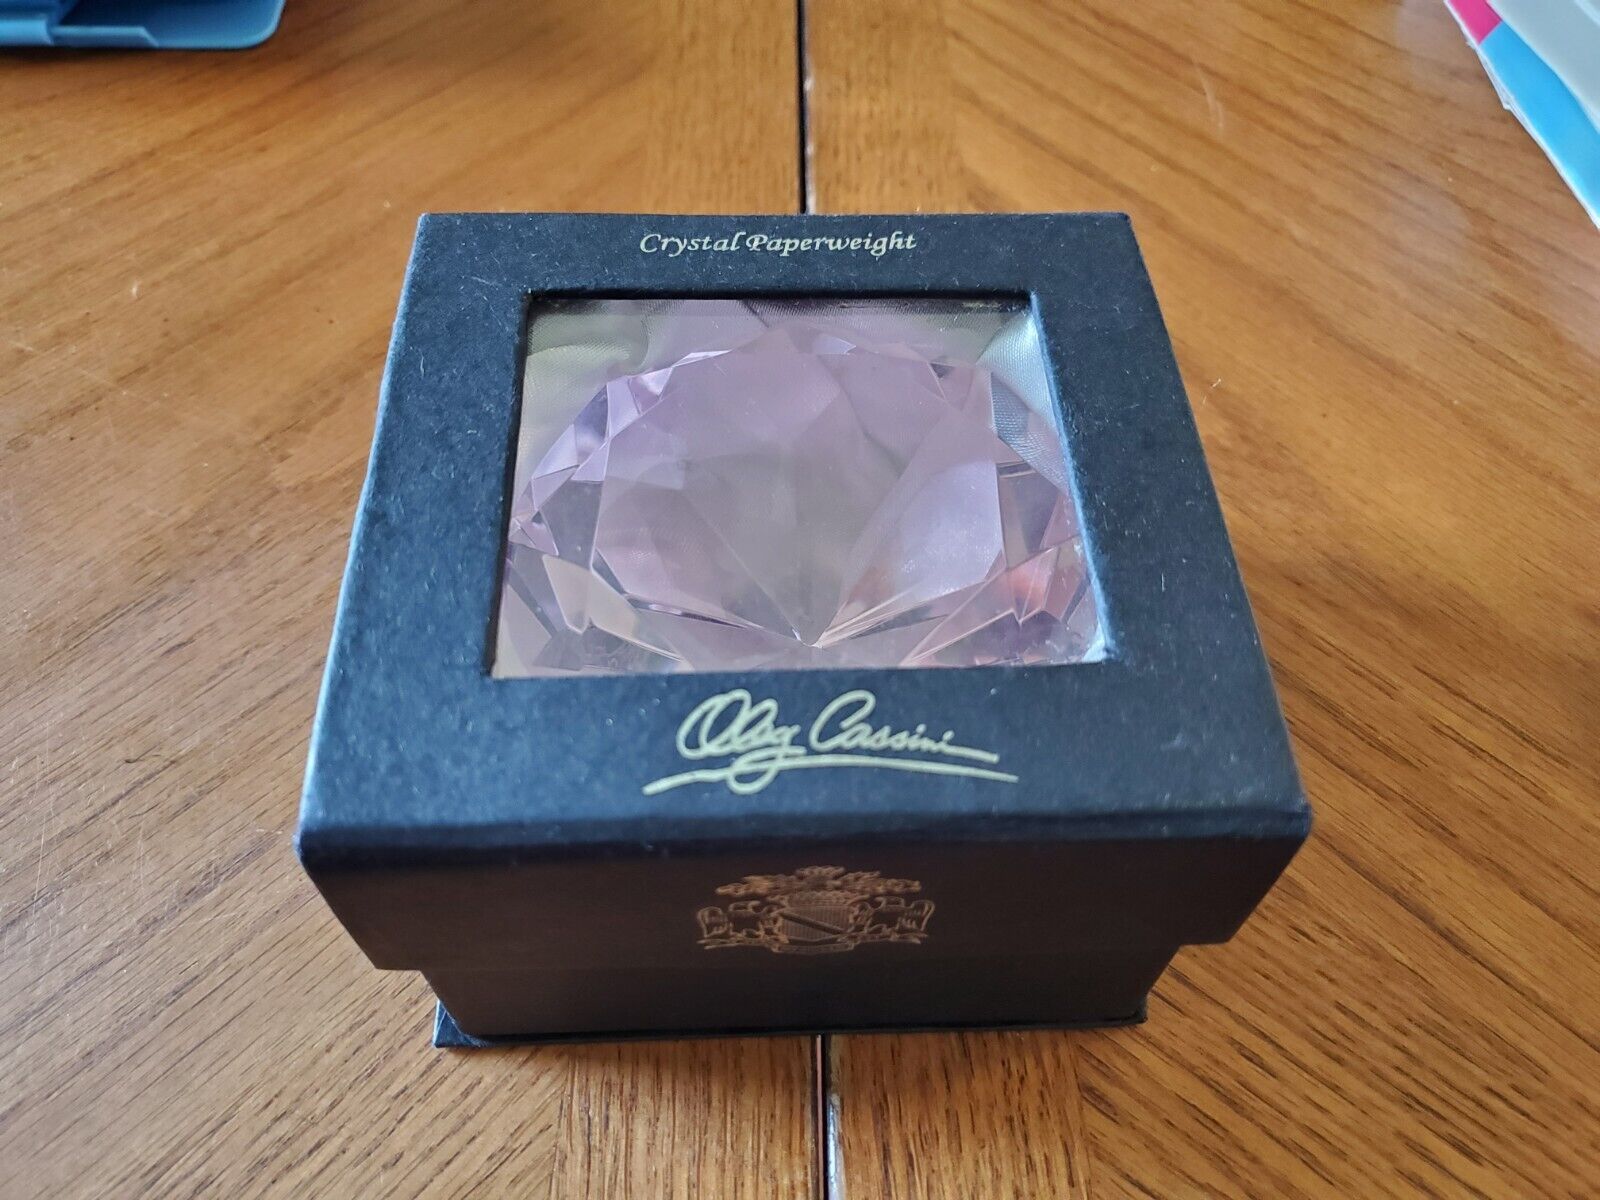 CRYSTAL DIAMOND SHAPE PINK PAPERWEIGHT IN BOX OLEG CASSINI AS PICTURED